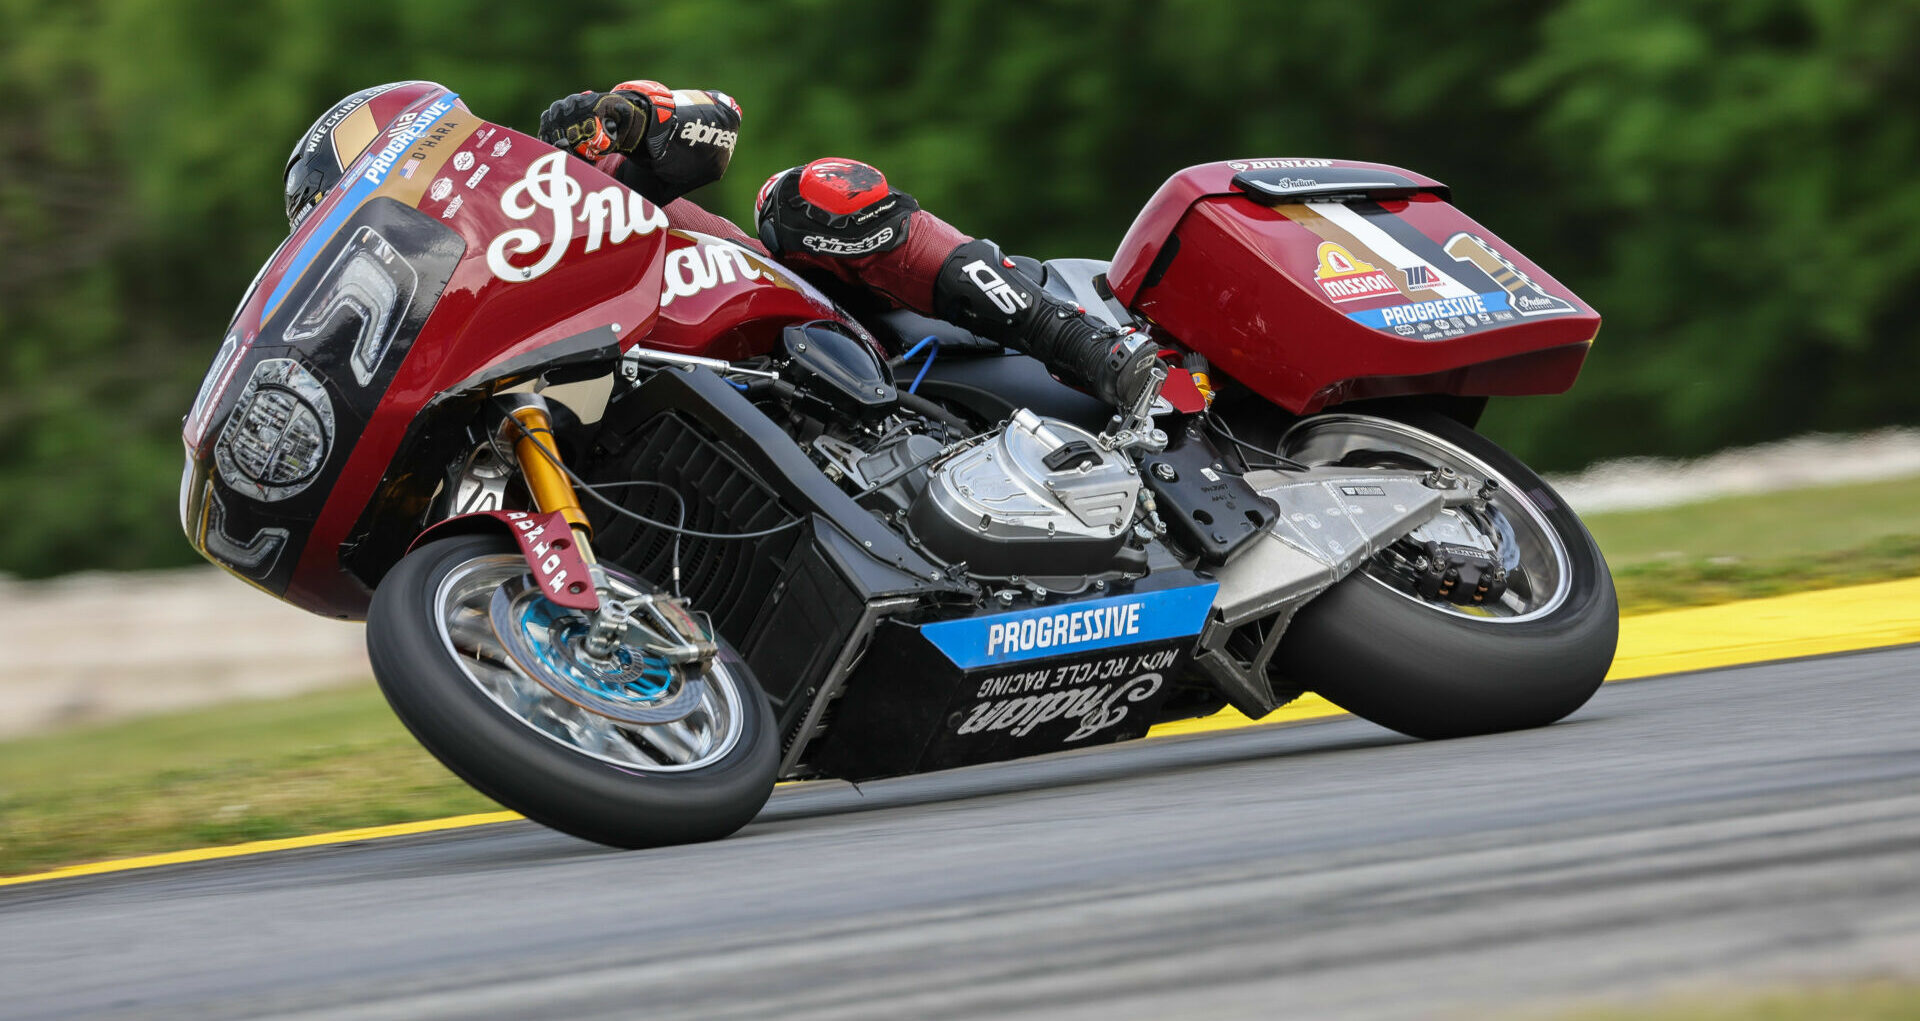 Indian Motorcycle is again an official partner of the 2023 Mission King Of The Baggers series with Tyler O'Hara (1) attempting to defend his 2022 championship on his Indian Challenger. Photo by Brian J. Nelson.